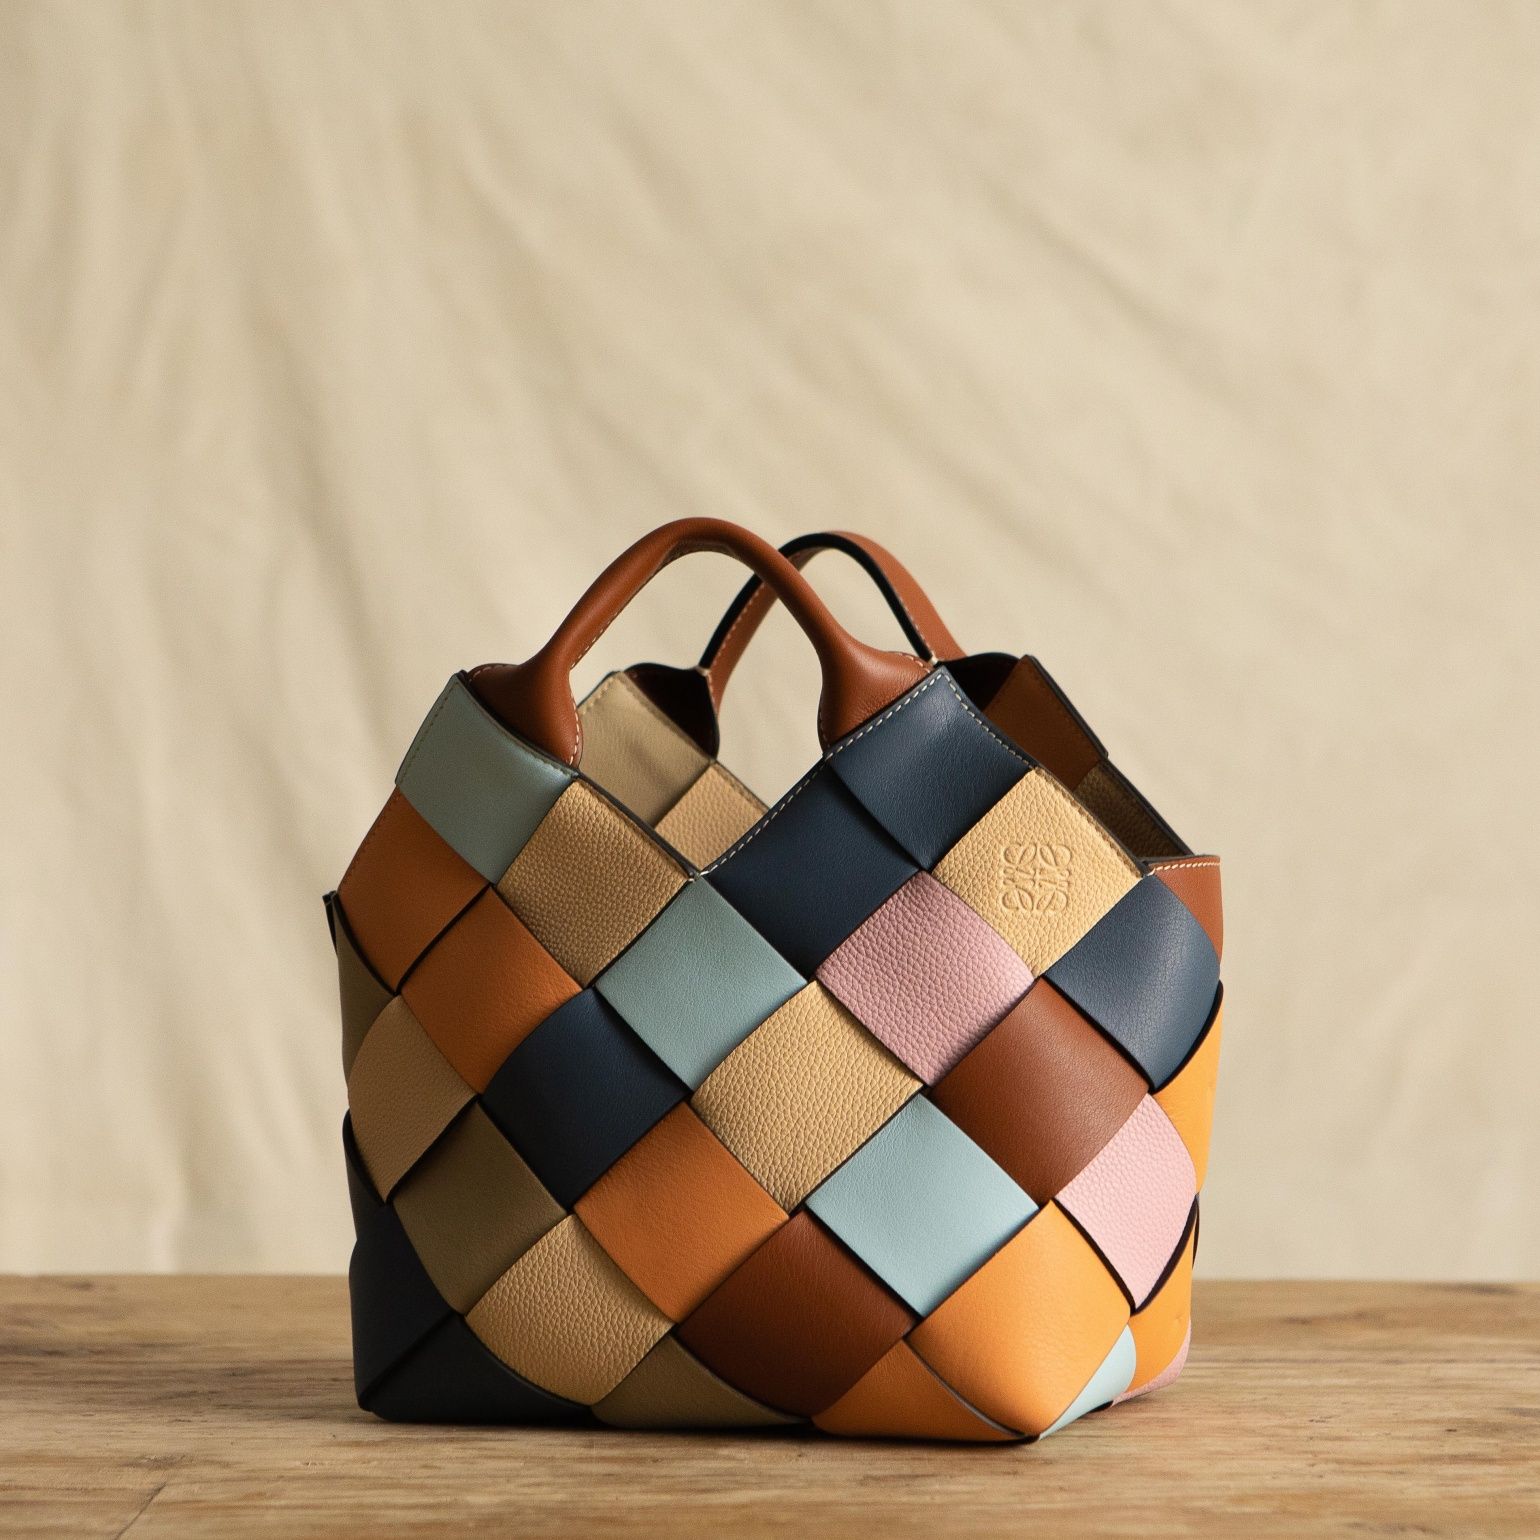 Loewe's New Basket Bag Has Arrived—Shop the Chic Style Here